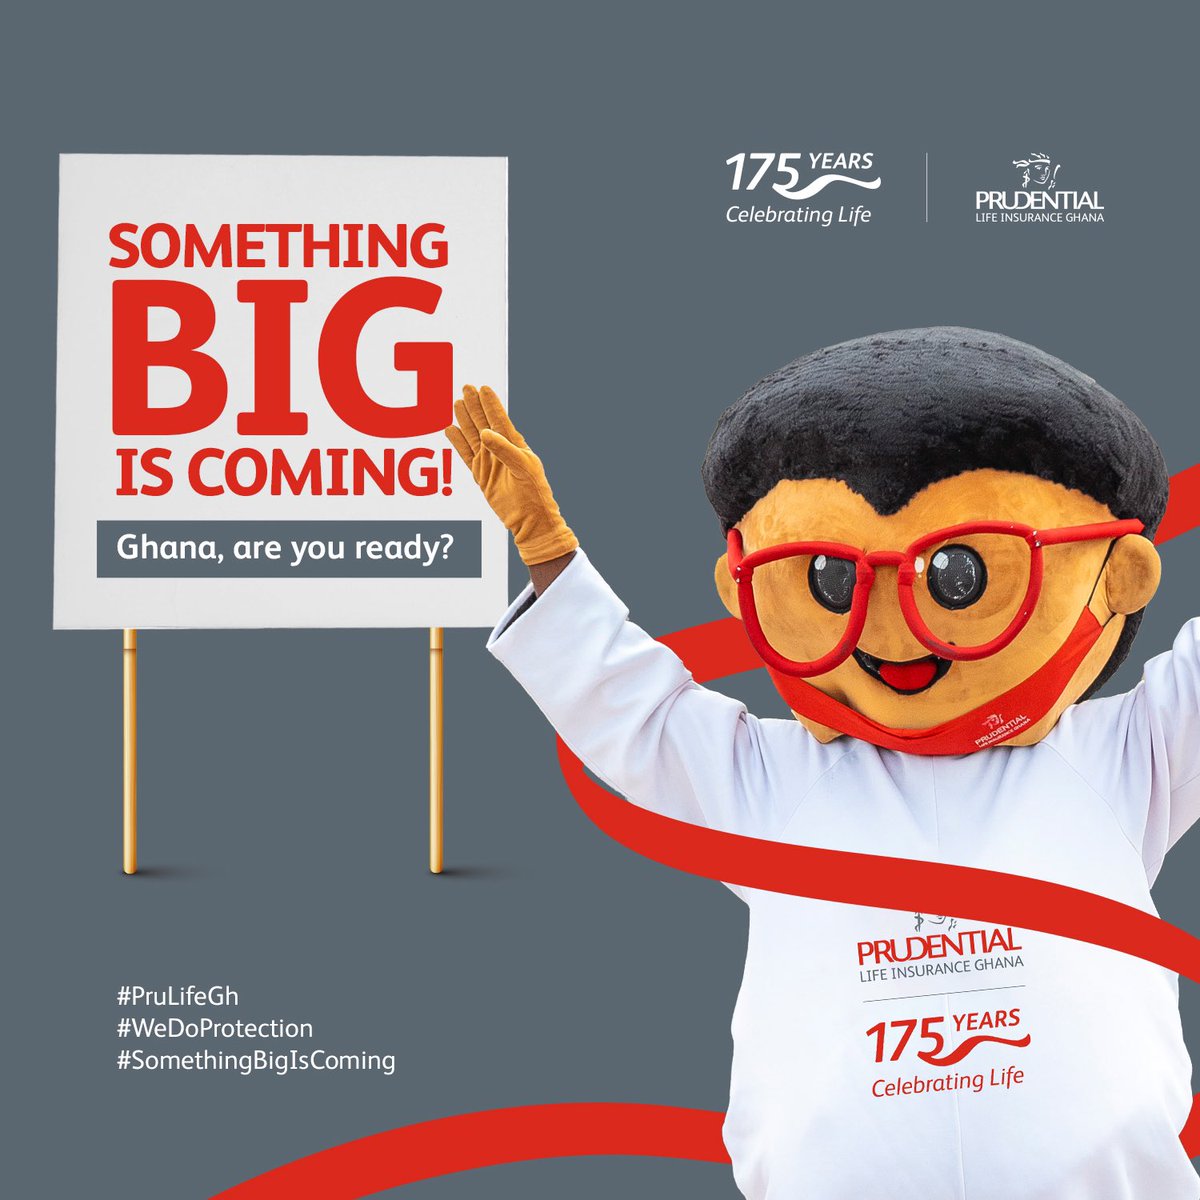 We have some super EXCITING news coming really soon! You don't want to miss it.
Tag a friend and keep your eyes on this page...
#PruLifeGH
#WeDoProtection
#SomethingBigIsComing